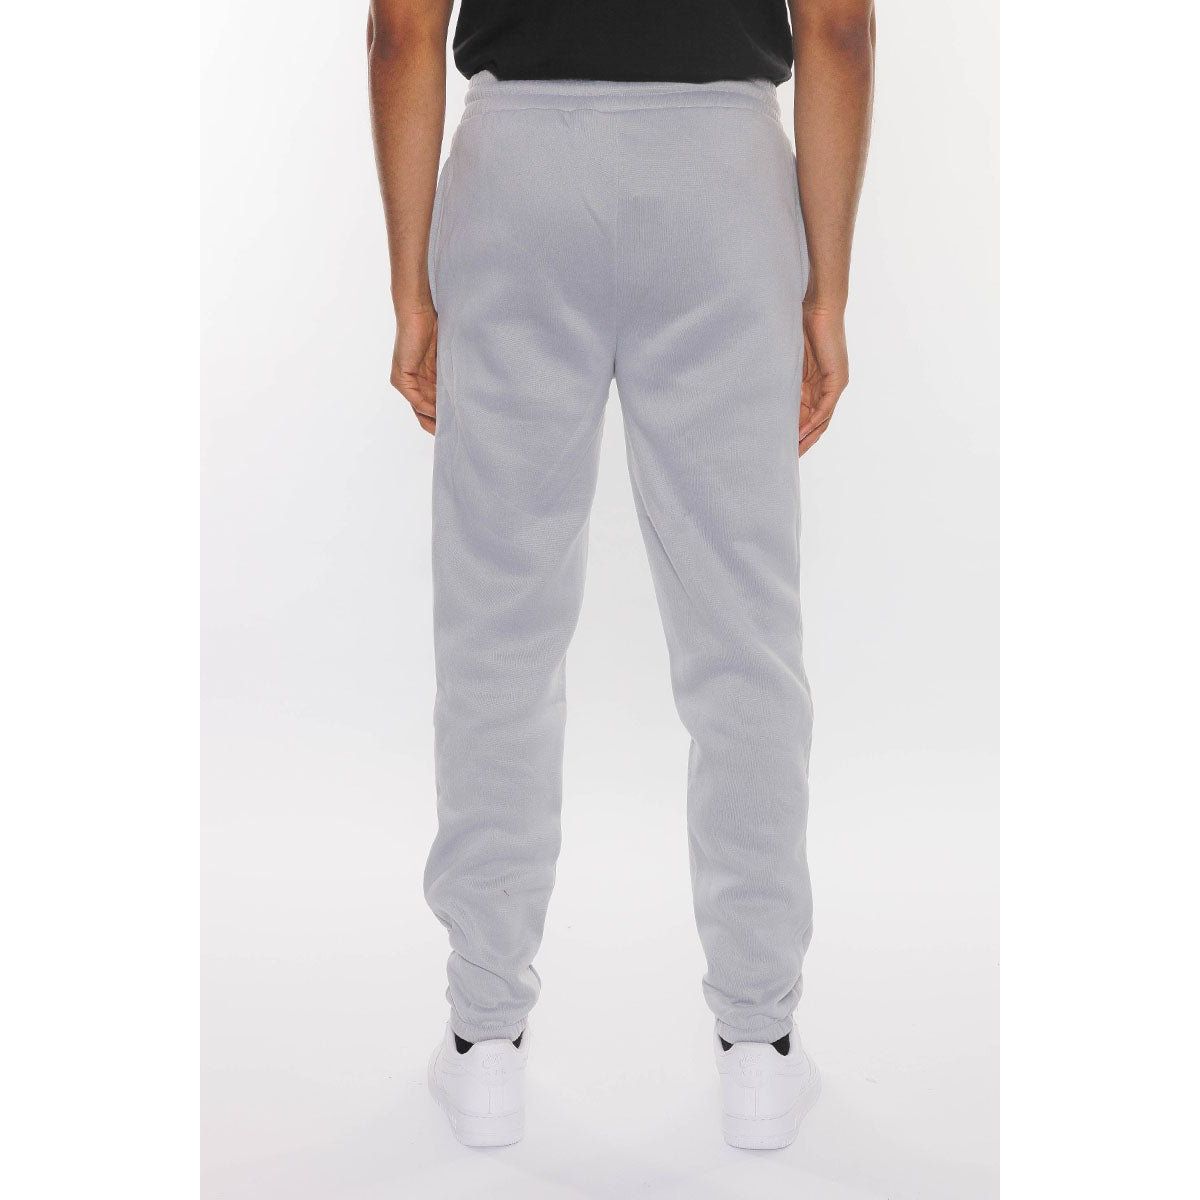 Jameson Sweat Pants - KME means the very best